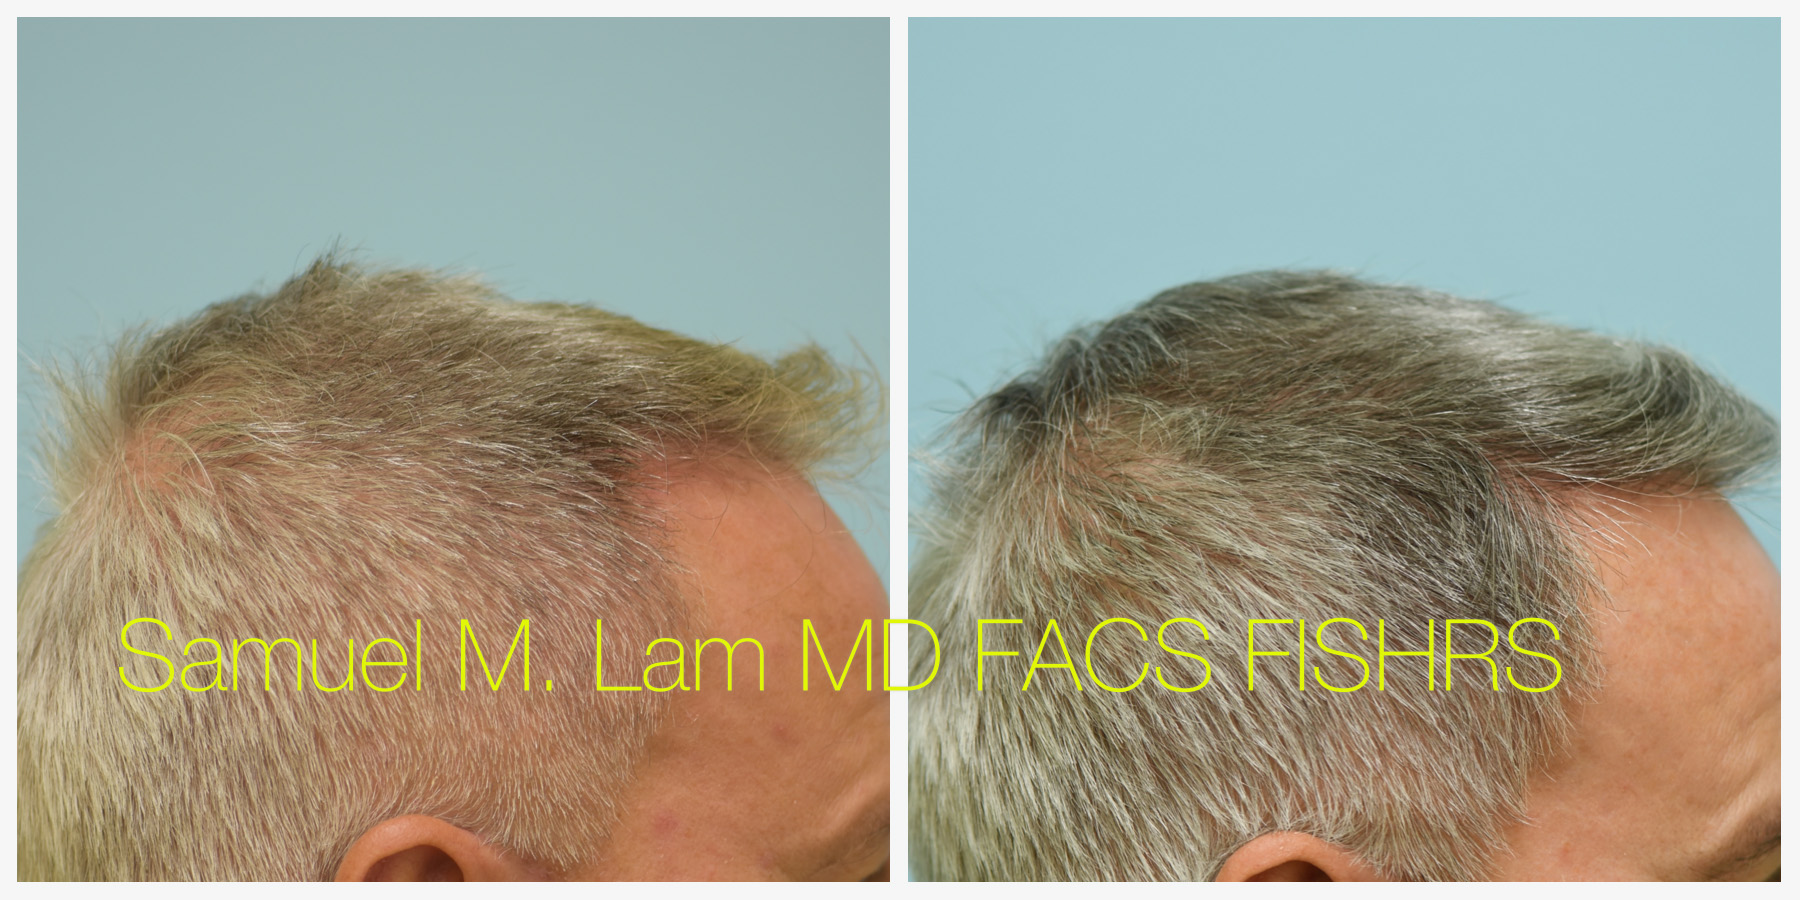 Dallas Hairline and Central Density Hair Restoration Before and After  Photos - Plano Plastic Surgery Photo Gallery - Dr. Samuel LamHairline and  Central Density Hair Restoration Archives | Lam, Sam ()